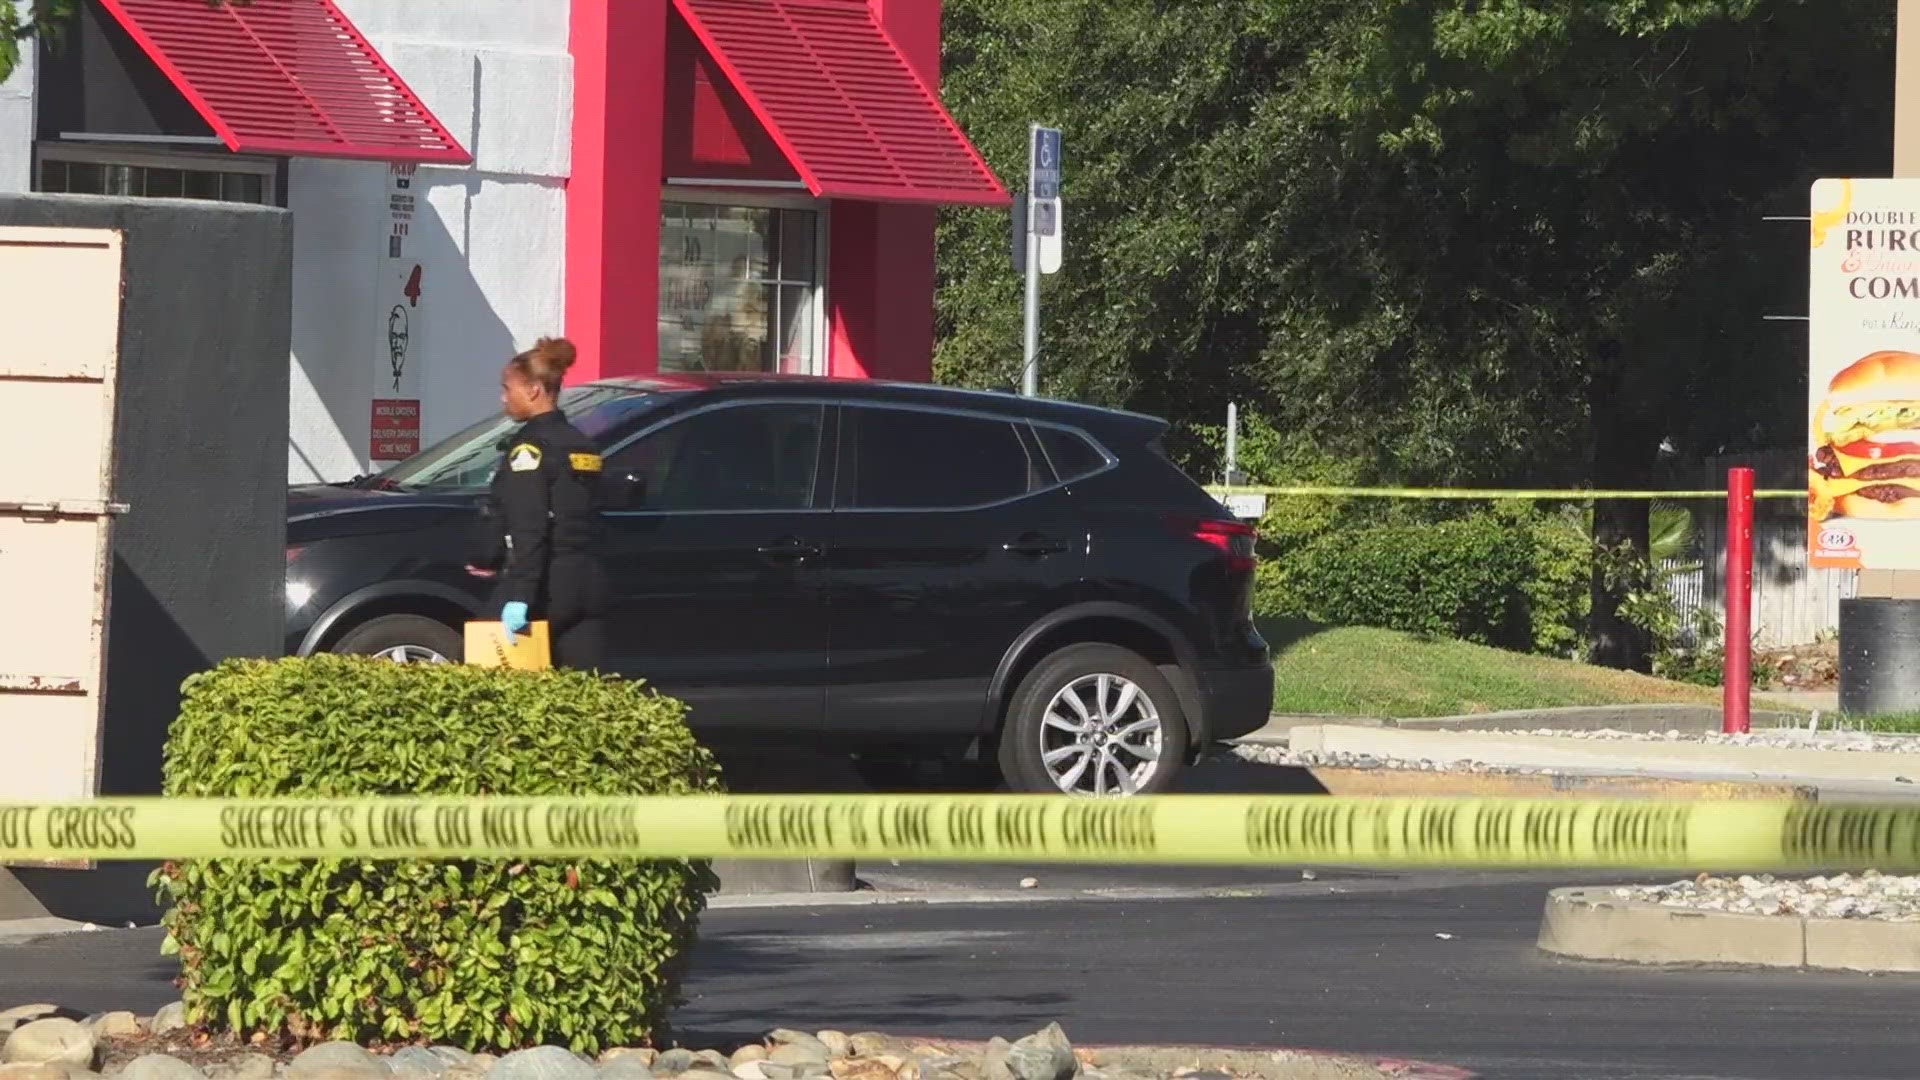 At least three shot at KFC in Antelope during an alleged attempted robbery